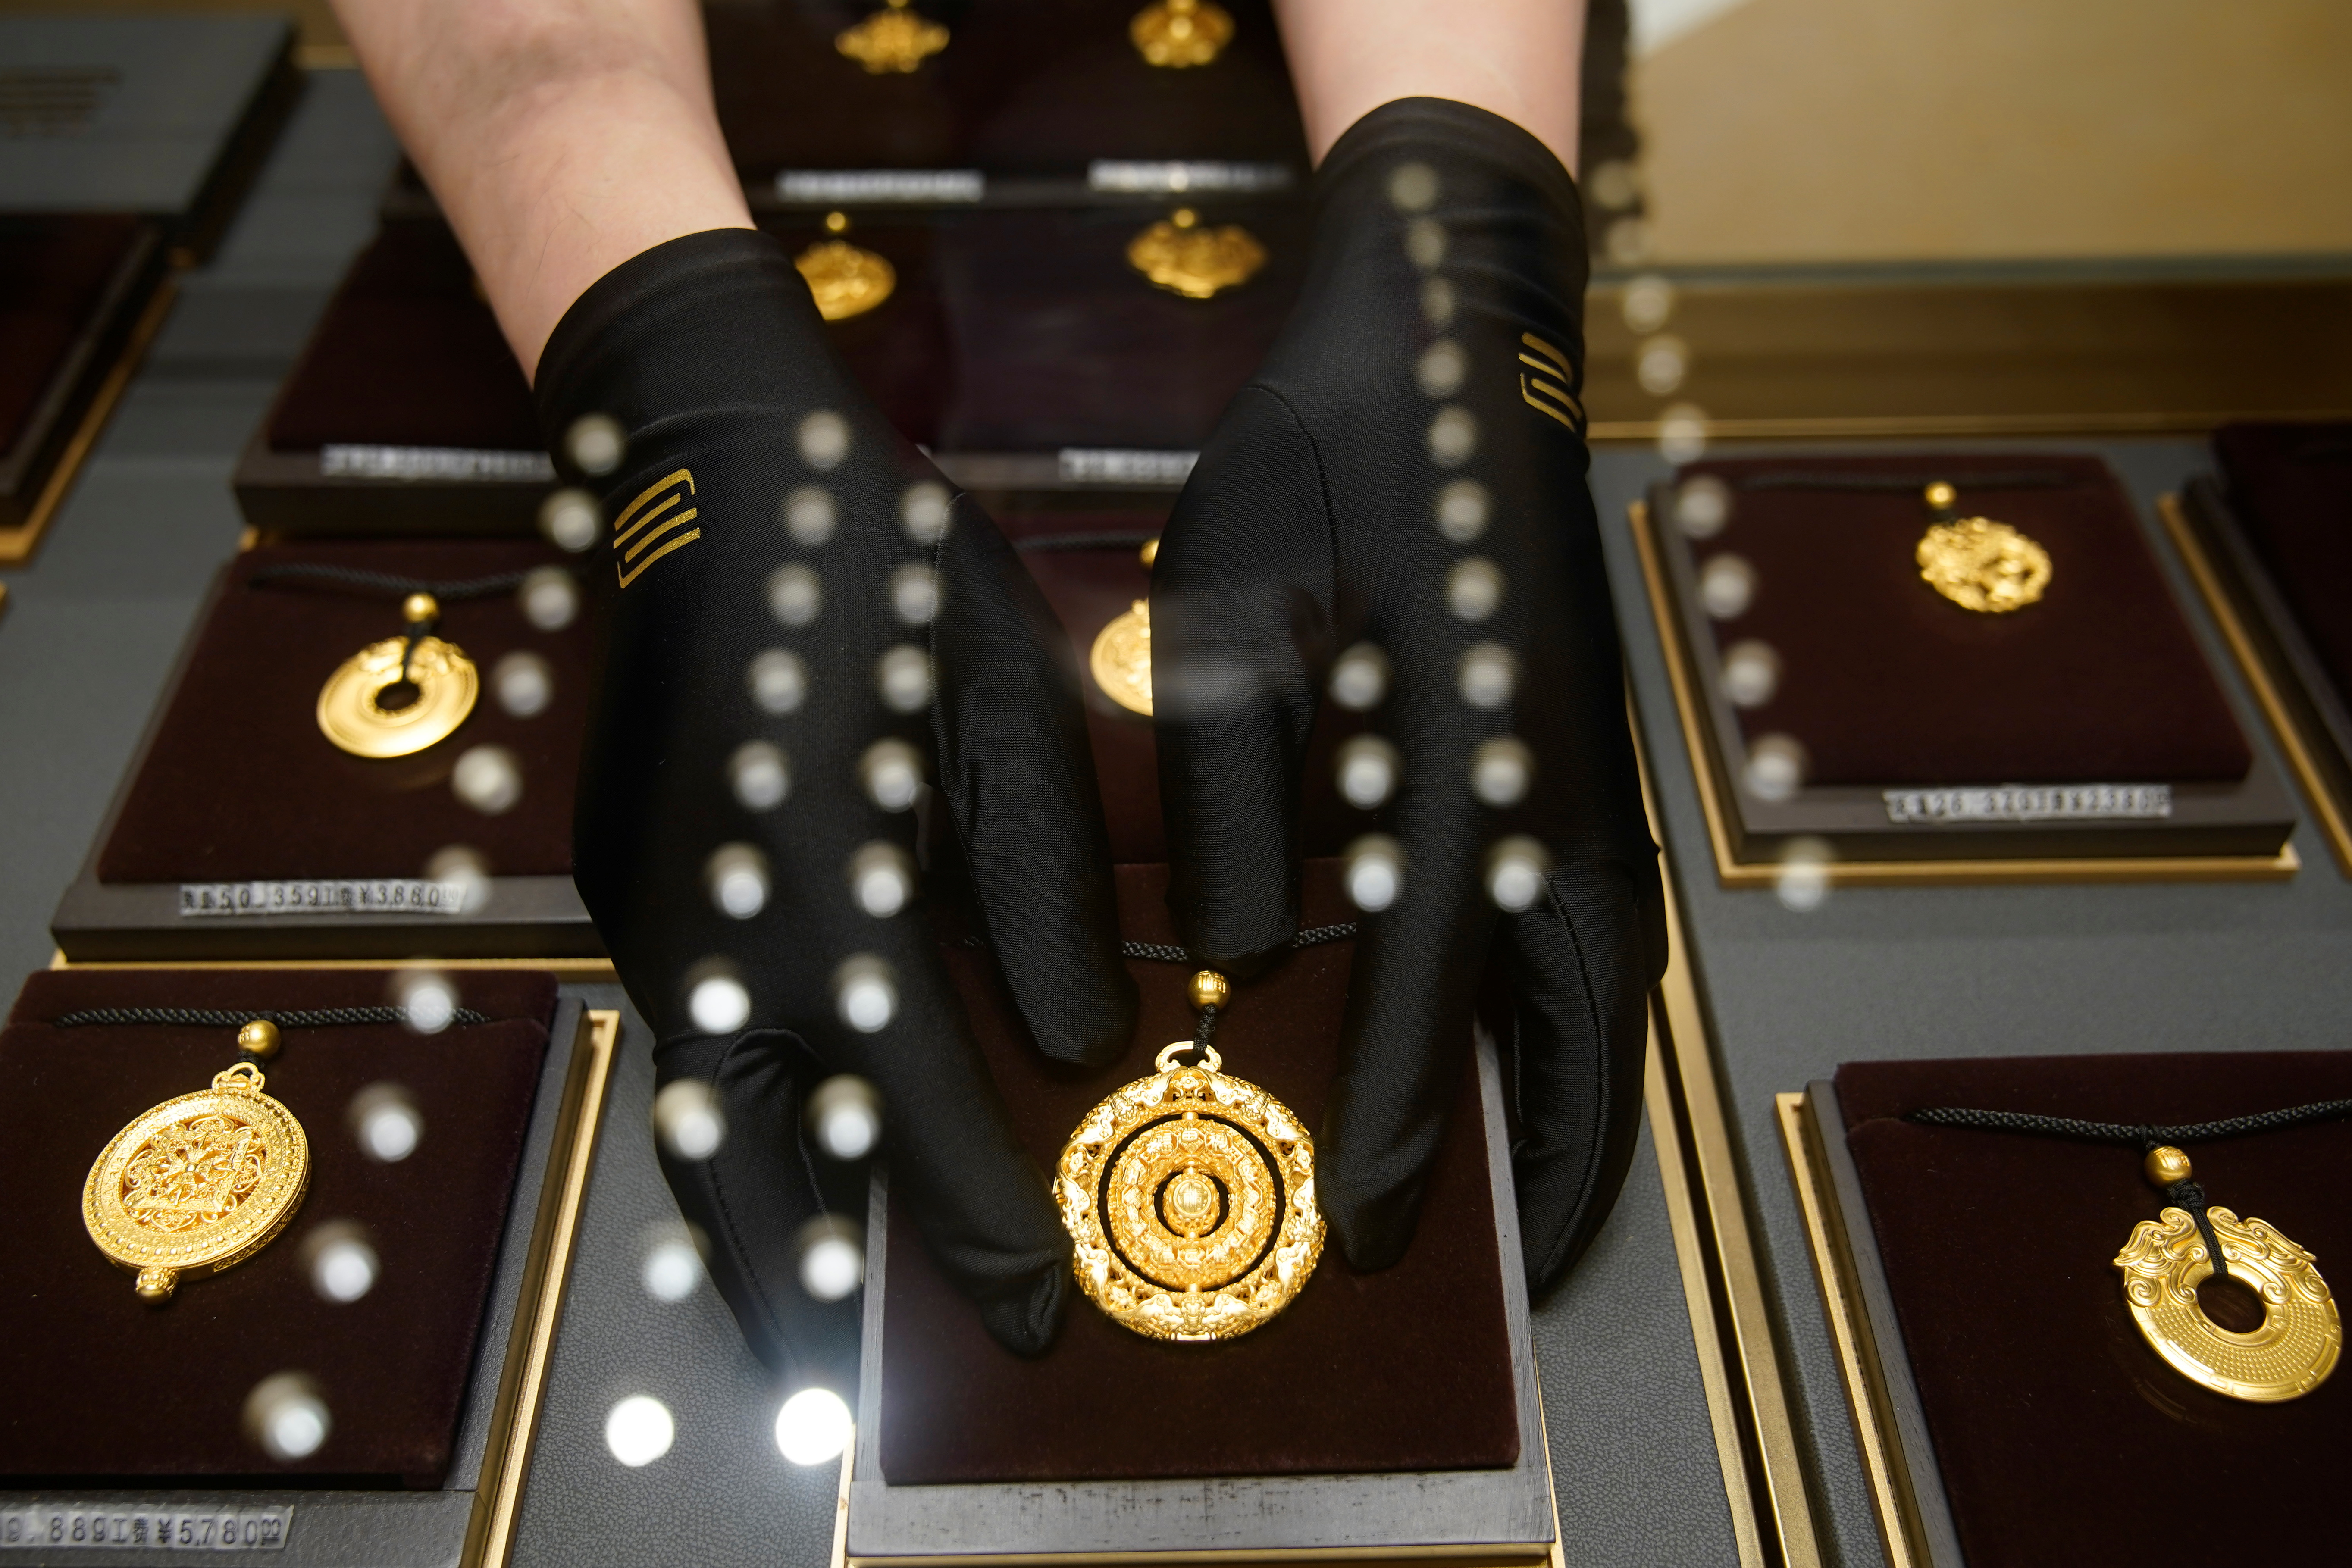 A salesperson poses with Heritage Gold jewellery at jeweller Chow Tai Fook’s retail store in Shanghai